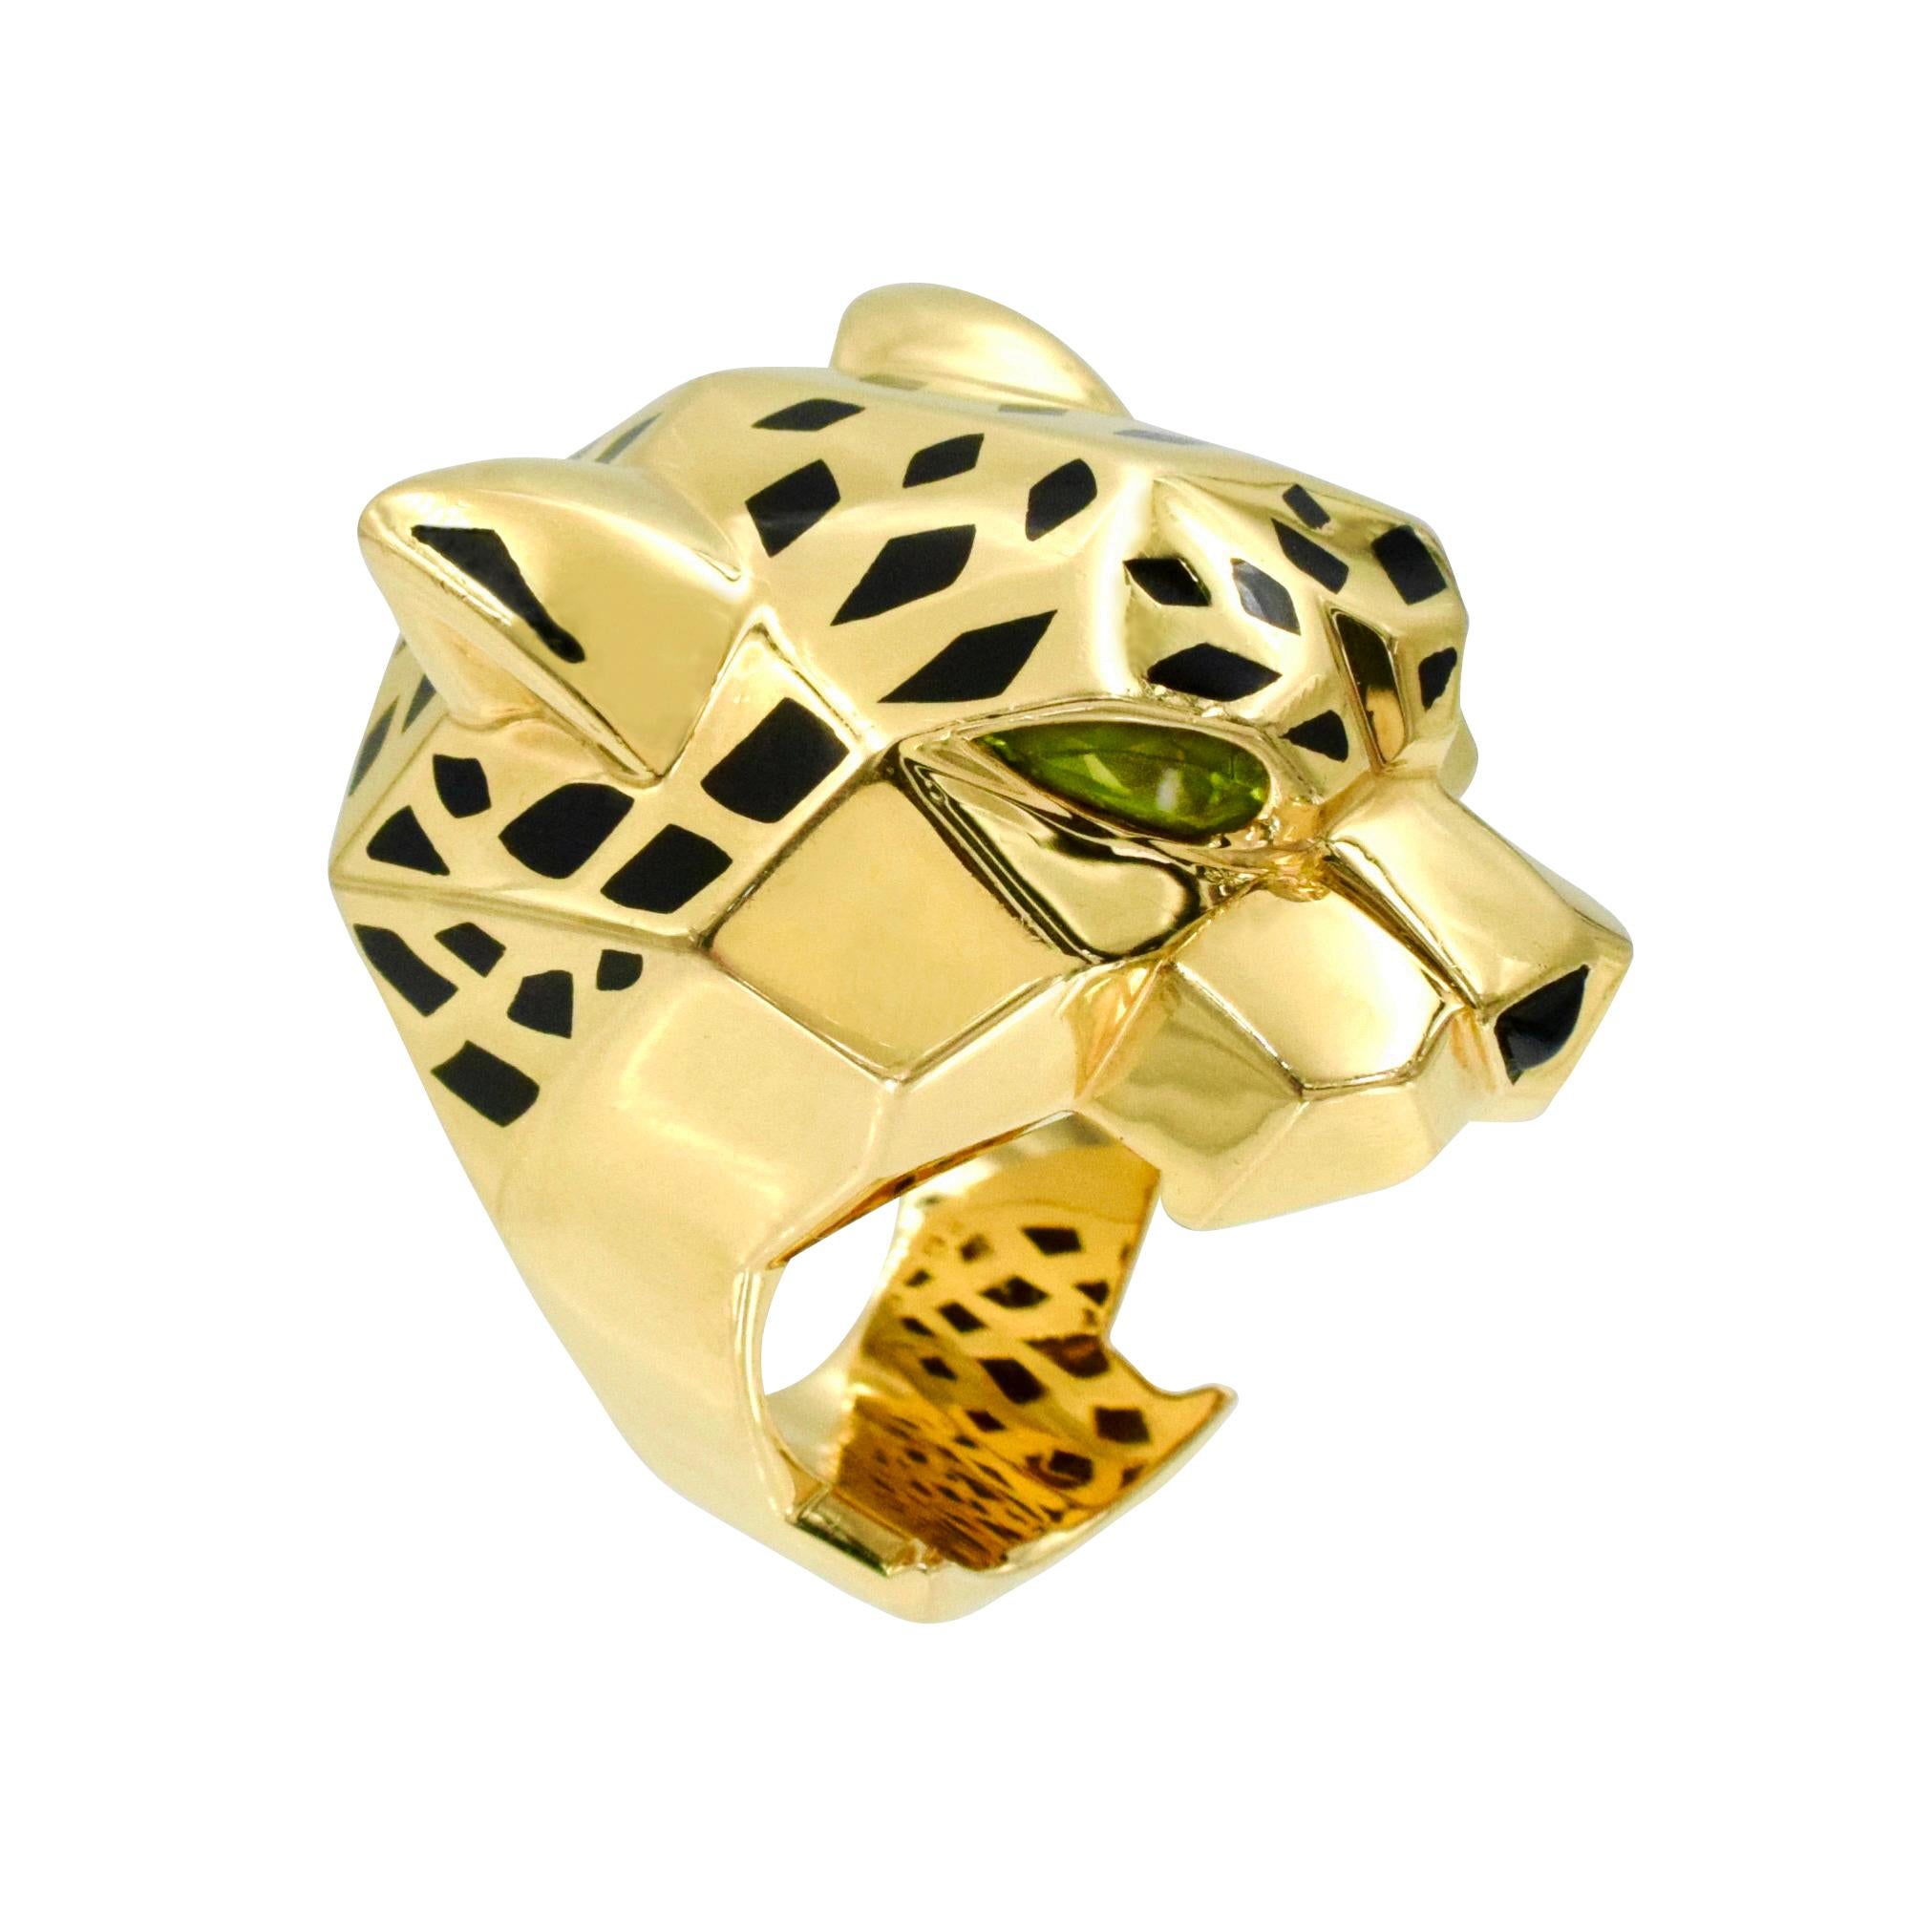 Panthère de Cartier large ring in 18K yellow gold. This substantial ring is designed as panther’s head, accented with black lacquer spots, peridot eyes and onyx nose. Measurements: 40.0mm by 30.0mm. Size: 60 / US 9. Inscribed: Cartier, 750, xxxxxxx,